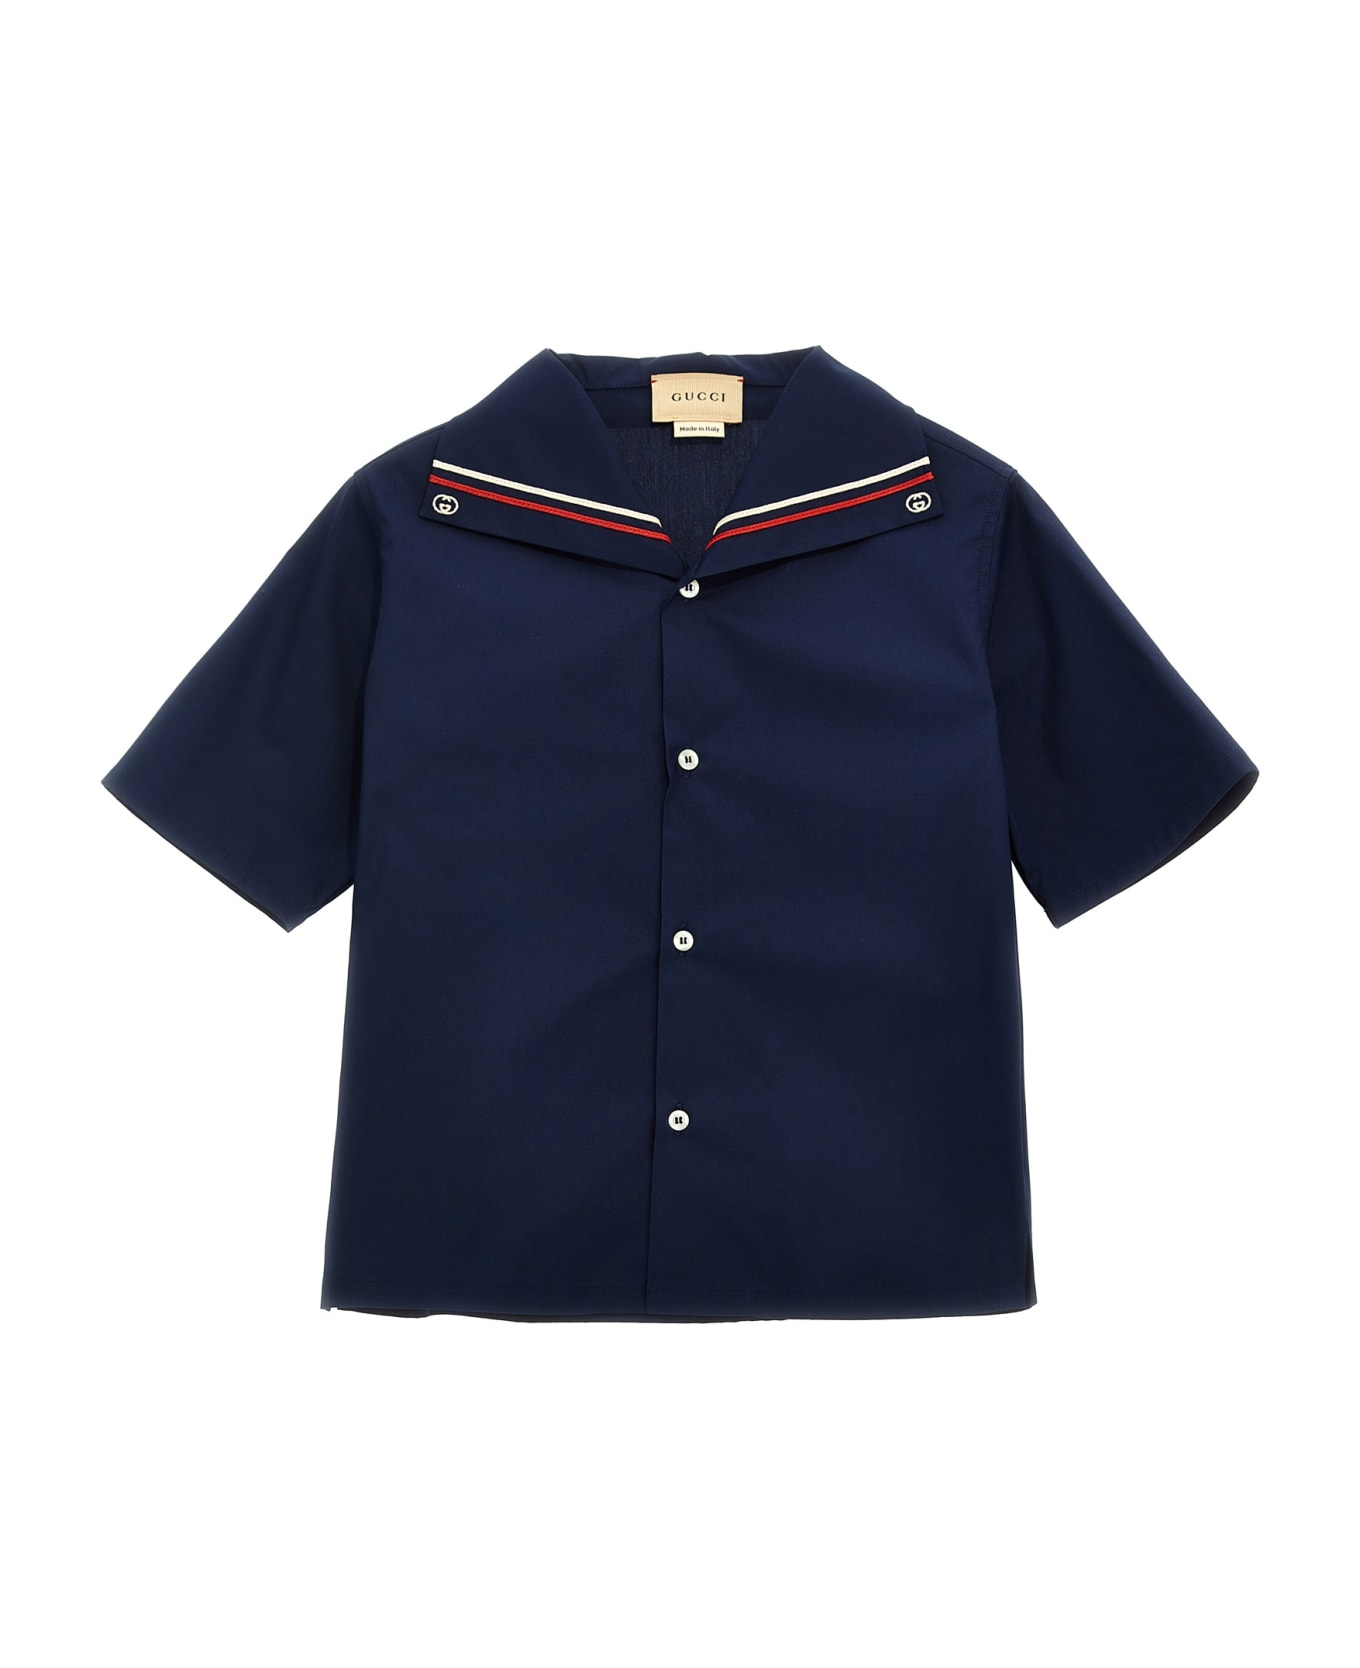 Gucci Collar Embroidery Shirt - Blue シャツ